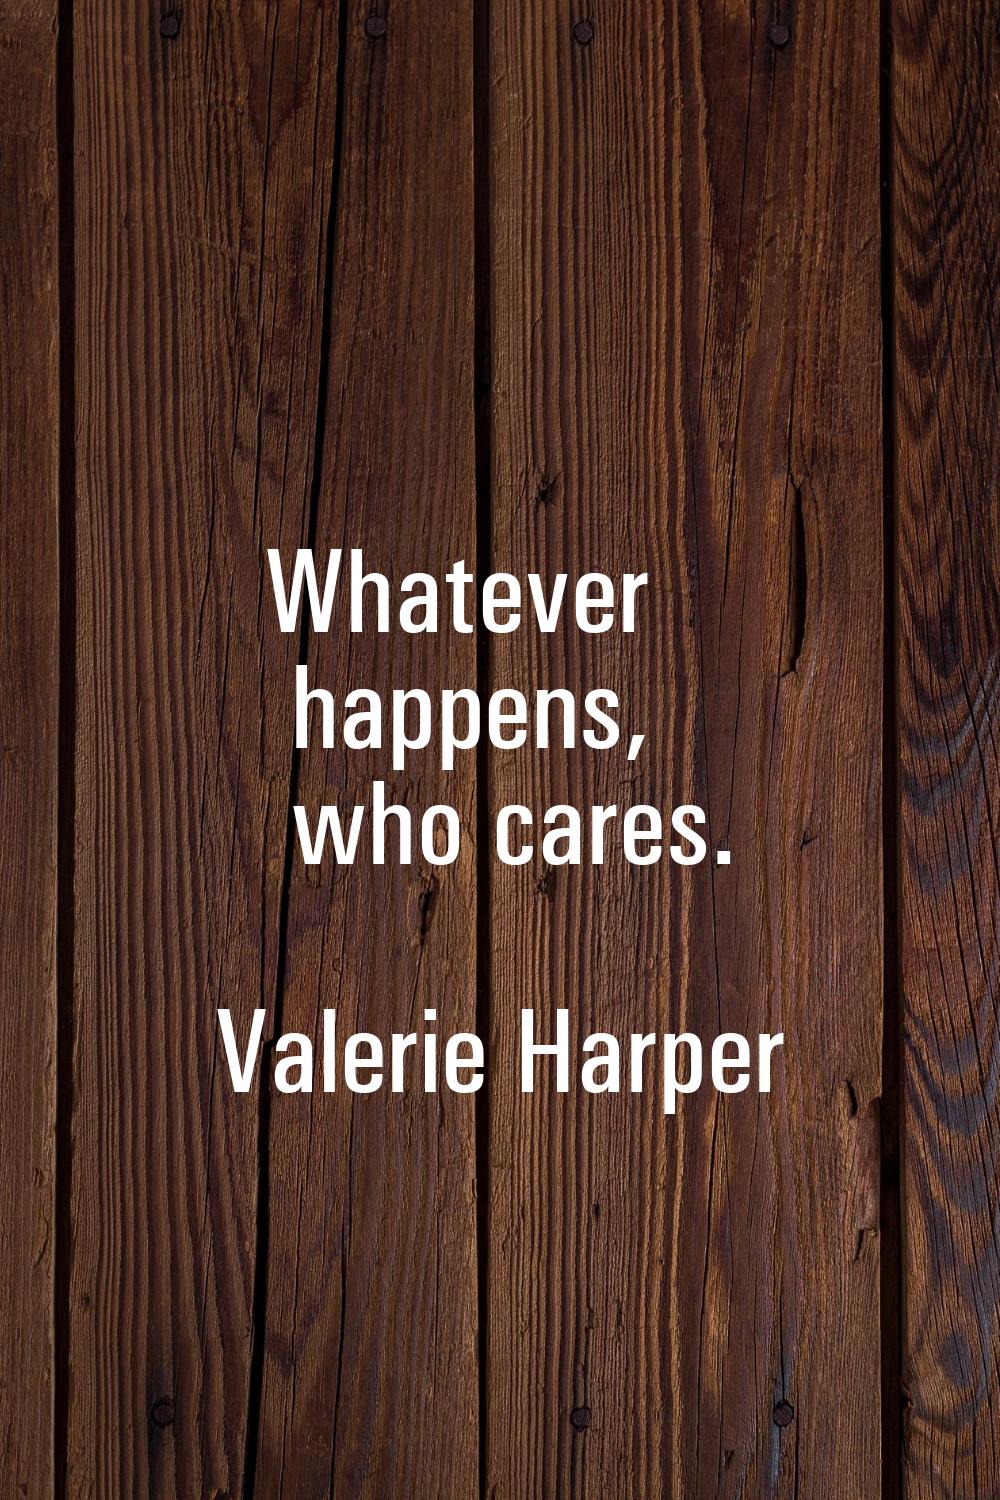 Whatever happens, who cares.